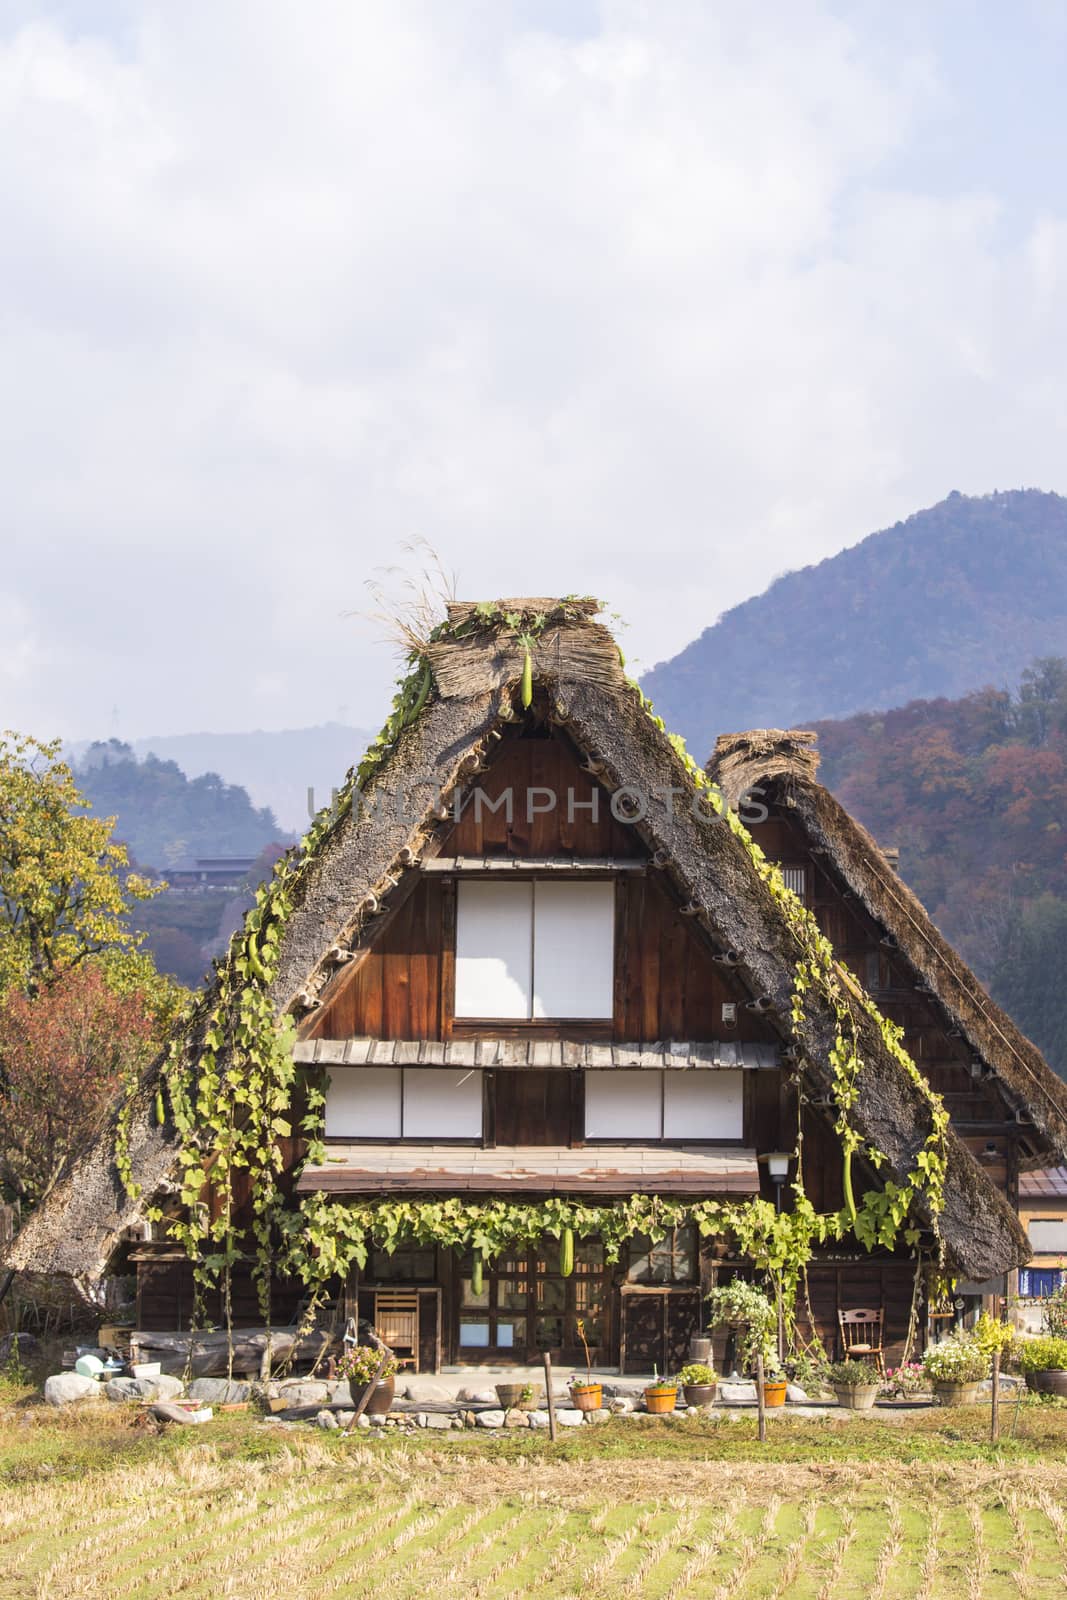 Cottage and rice field in small village shirakawa-go japan. autu by 2nix